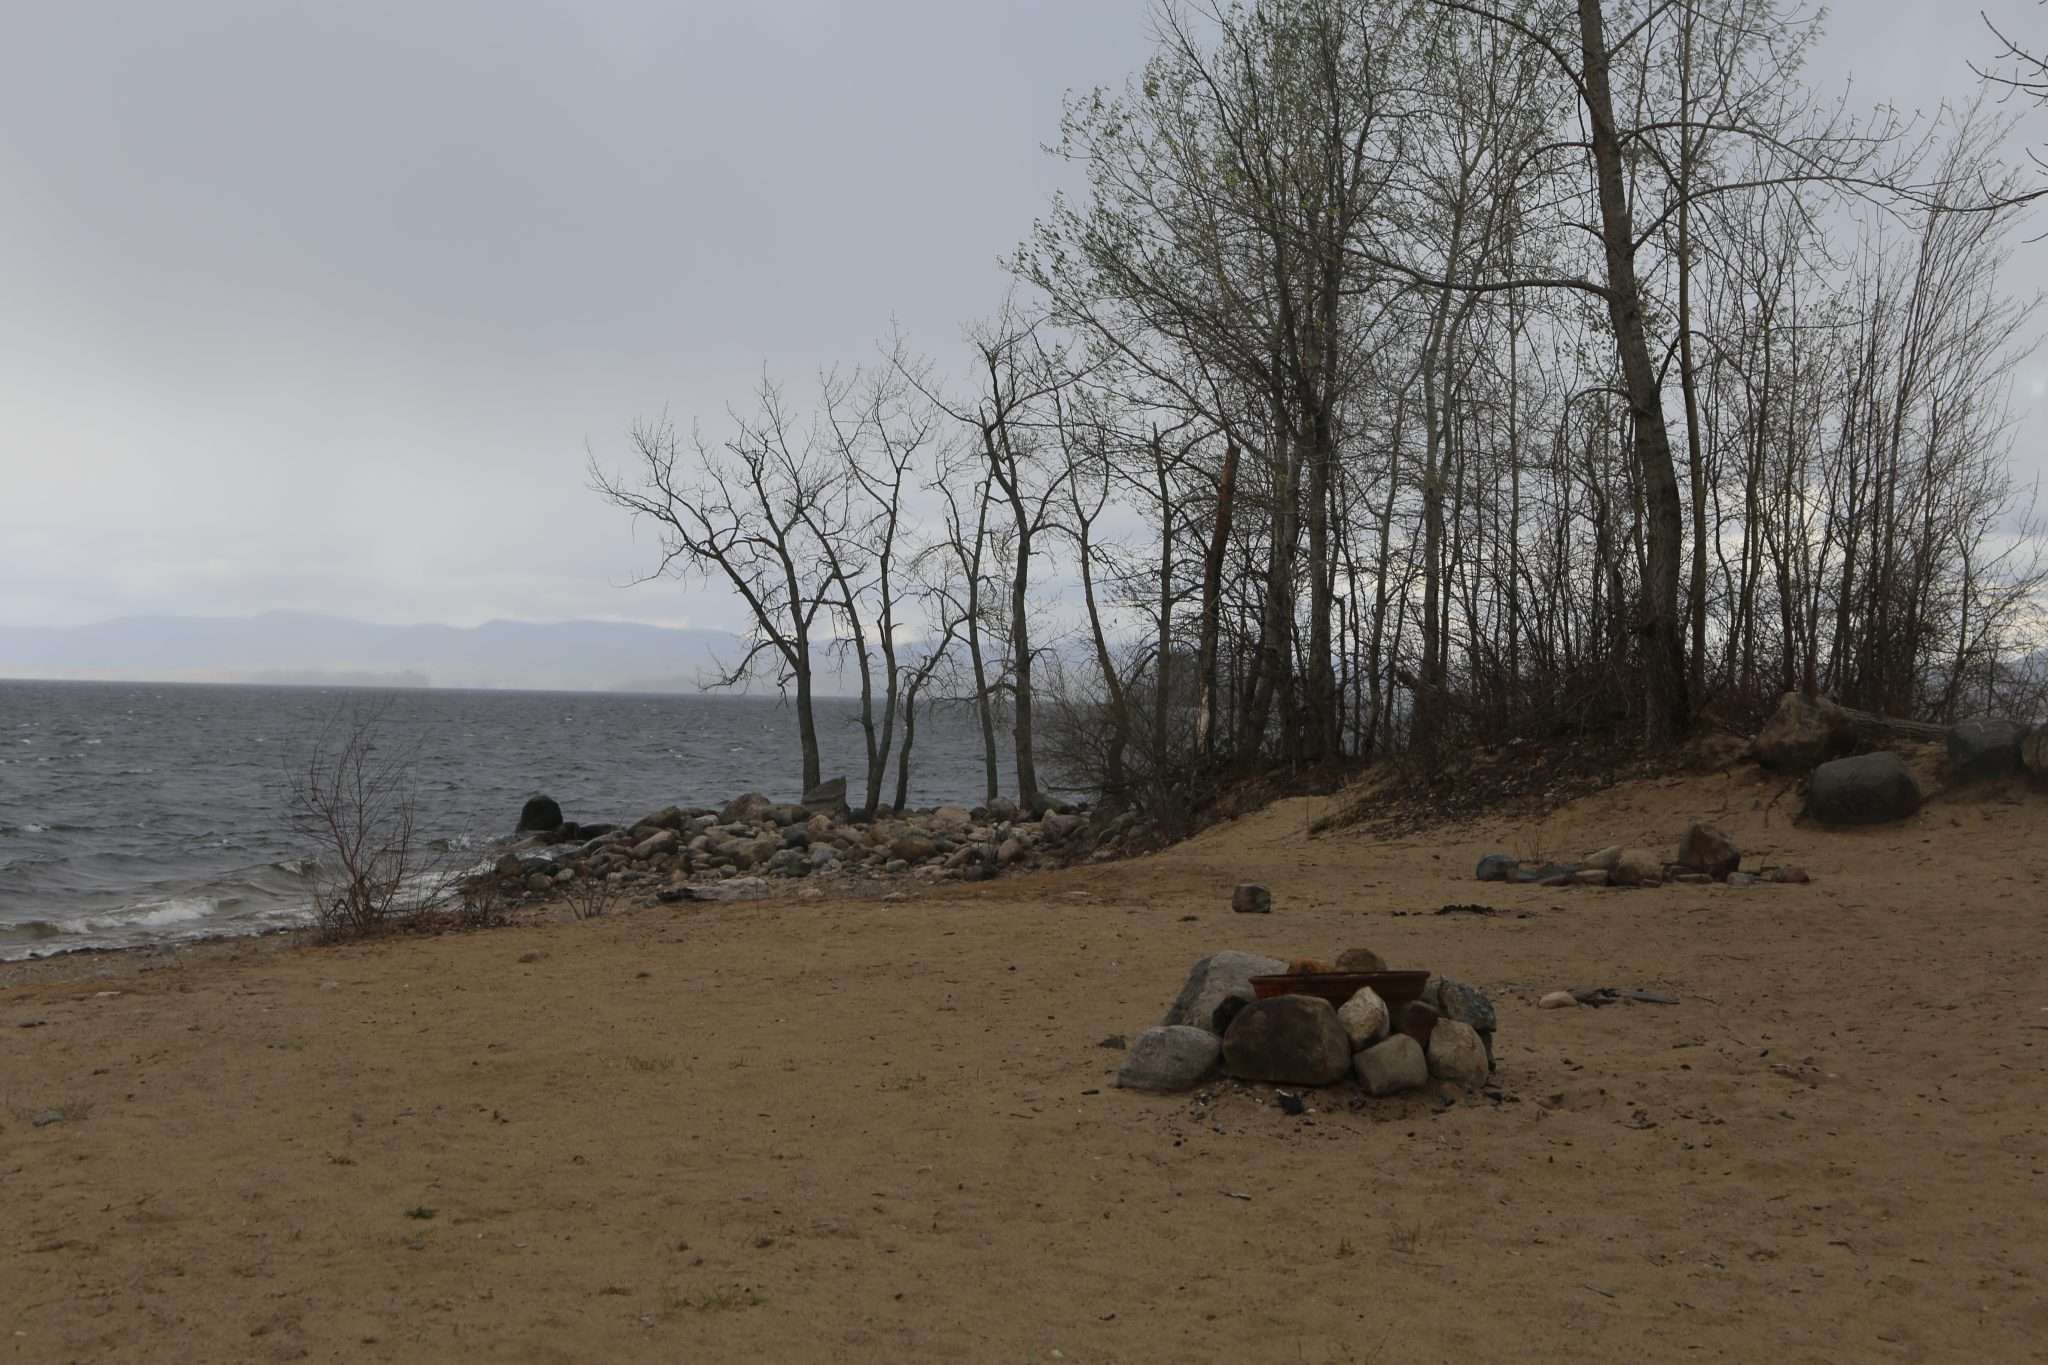 An illegal fire pit on the Broadalbin Beach looking out on Great Sacanadaga Lake.